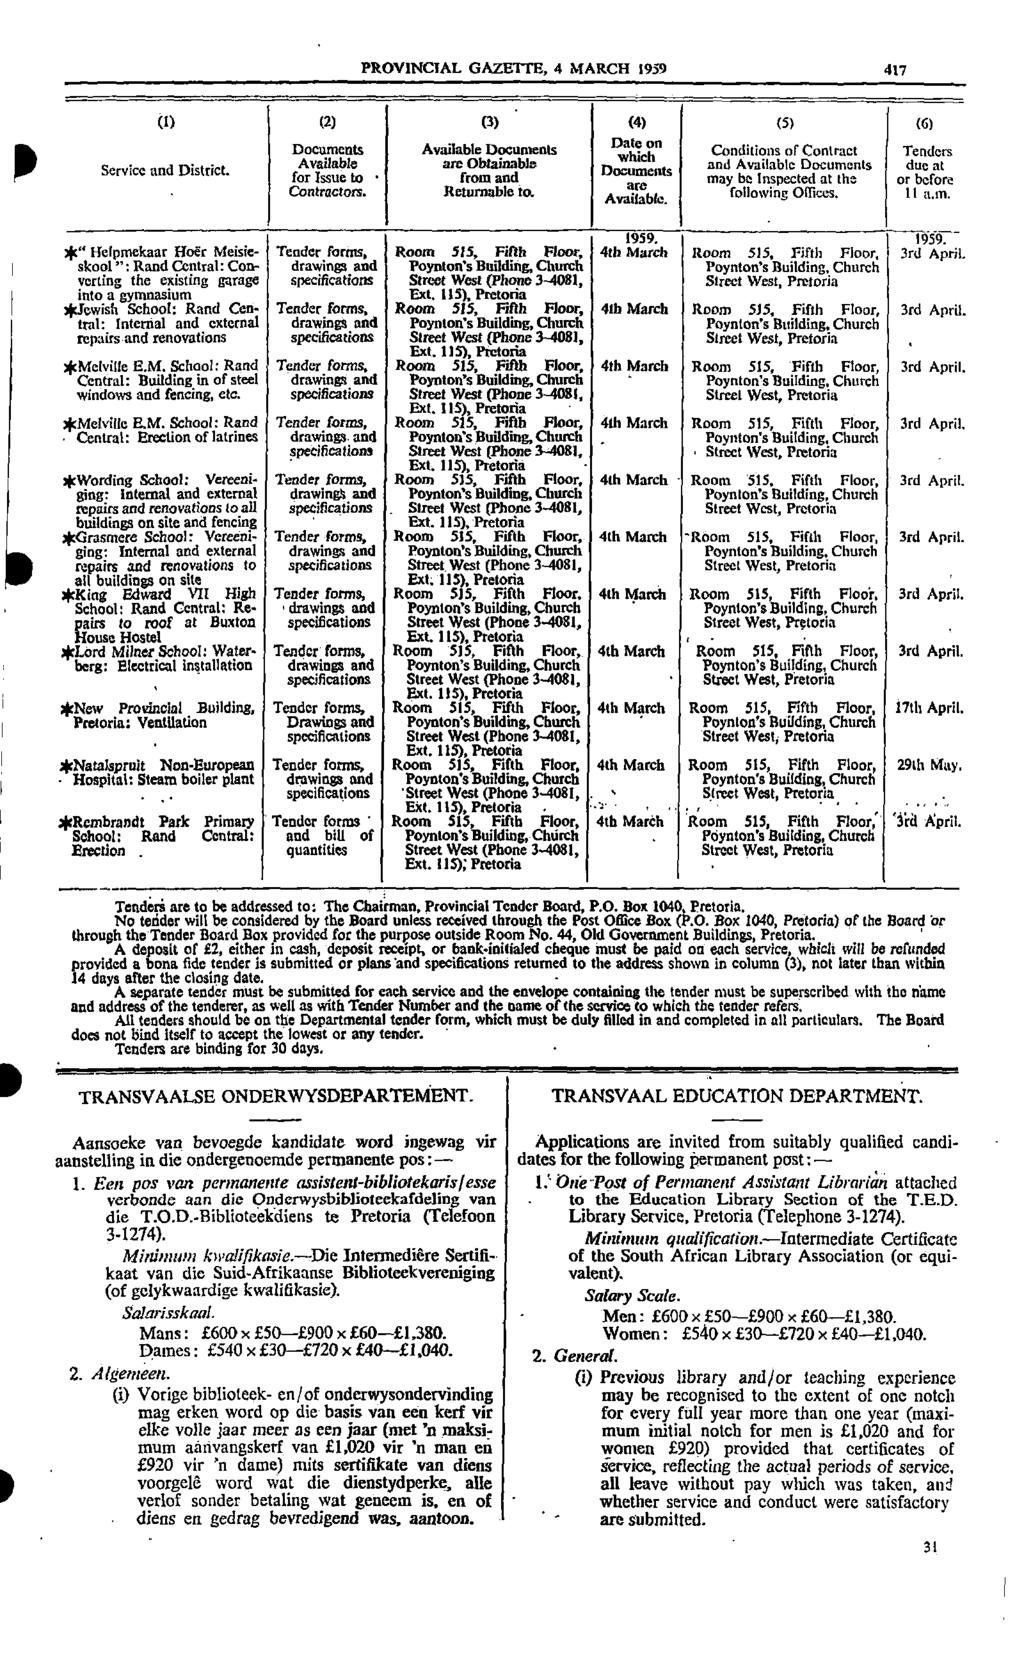 1 PROVINCIAL GAZETTE 4 MARCH 1959 417 P (1) (2) (3) (4) (5) (6) service and District Documents Available Documents Available am Obtainable for Issue to from and Contractors Returnable to Date on